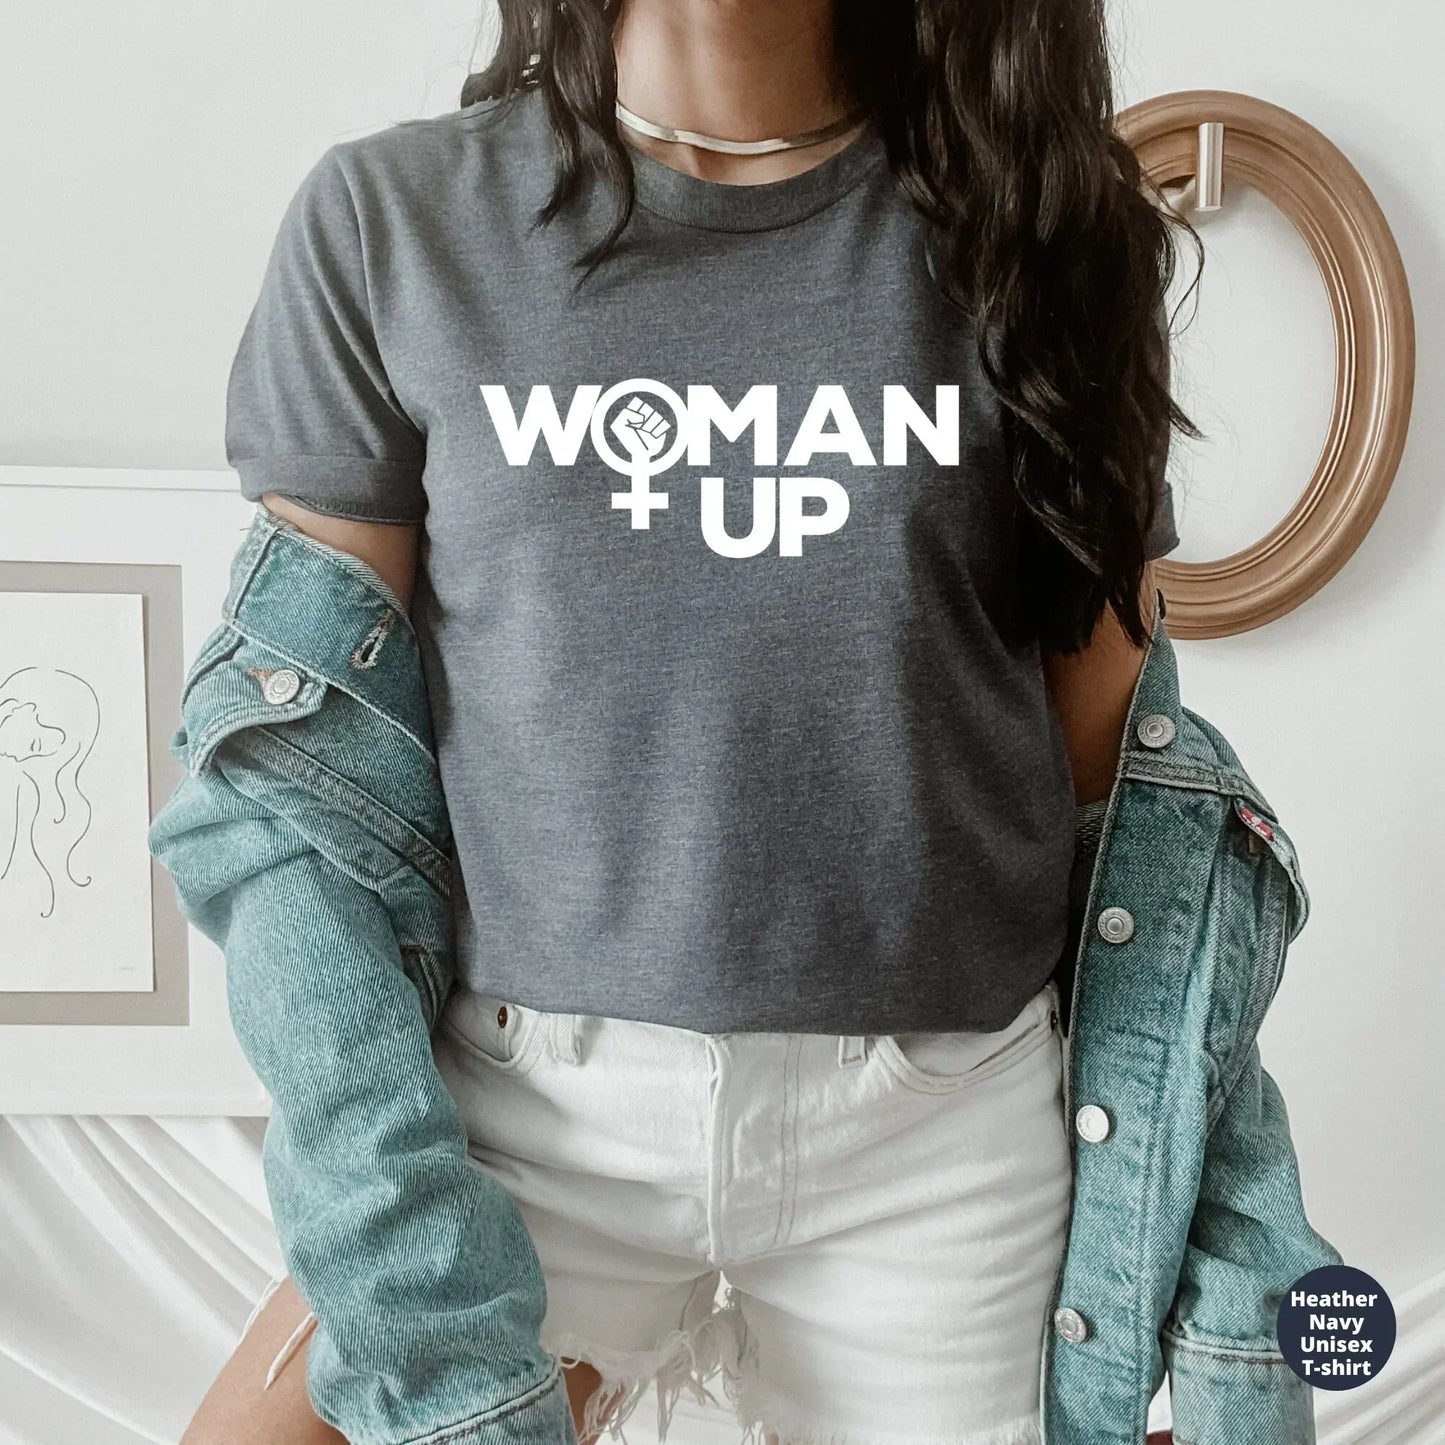 Pro Choice Shirt, Protest T-Shirt, Human Rights, Empower Women Sweater, Protect Roe v Wade, Activist, Equality Sweatshirt, Feminist Hoodie HMDesignStudioUS